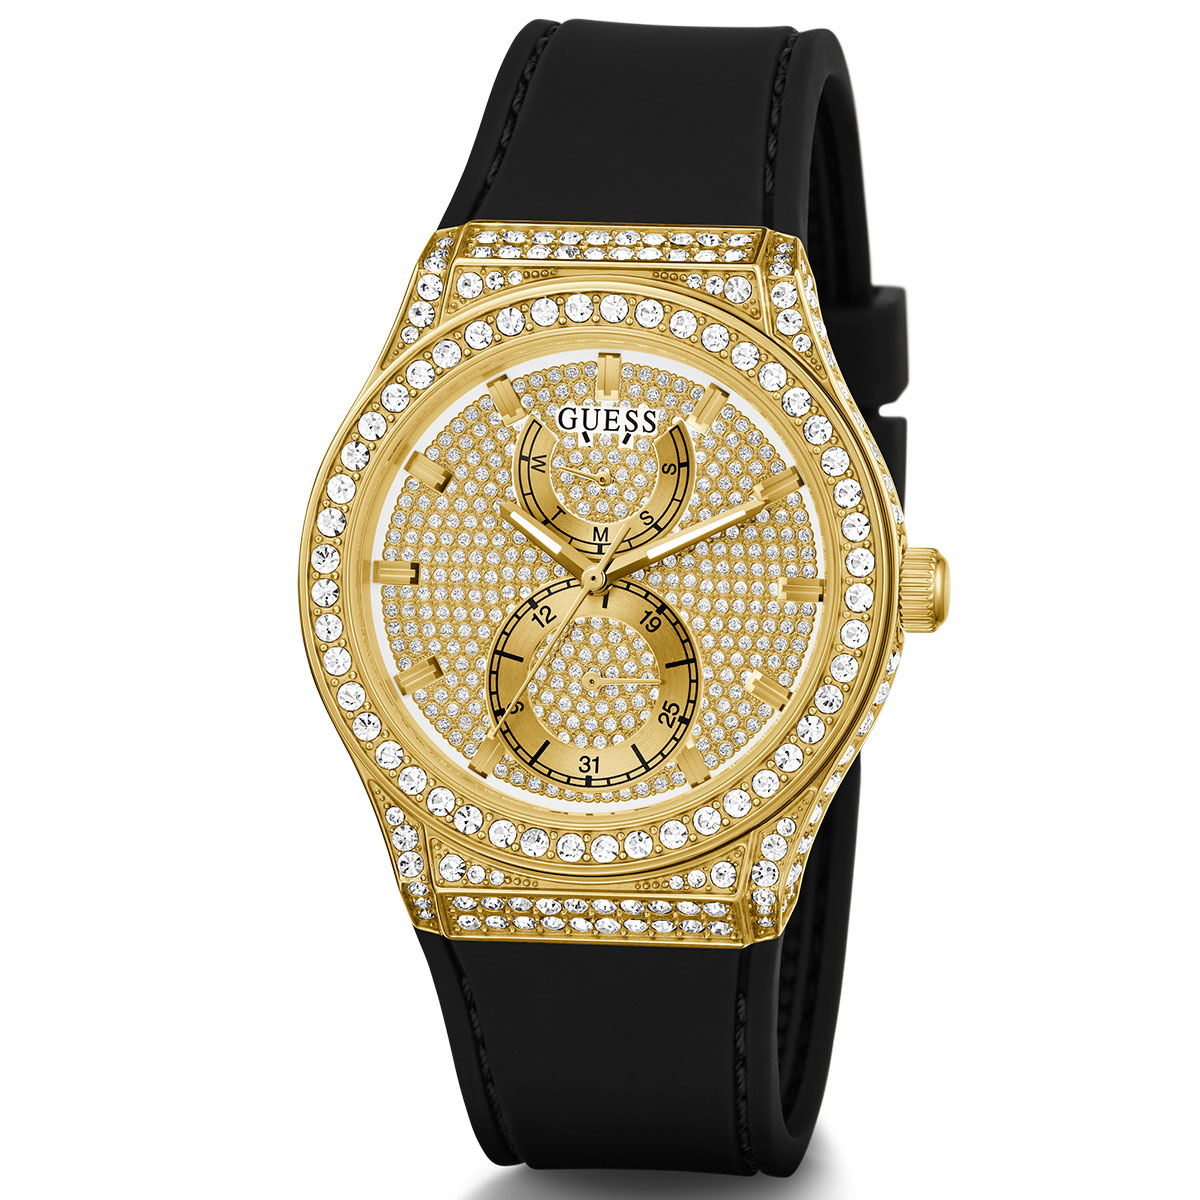 ĐỒNG HỒ NỮ GUESS MULTIFUNCTION CRYSTALLIZED PRINCESS BLACK GOLD TONE LADIES WATCH GW0439L2 8